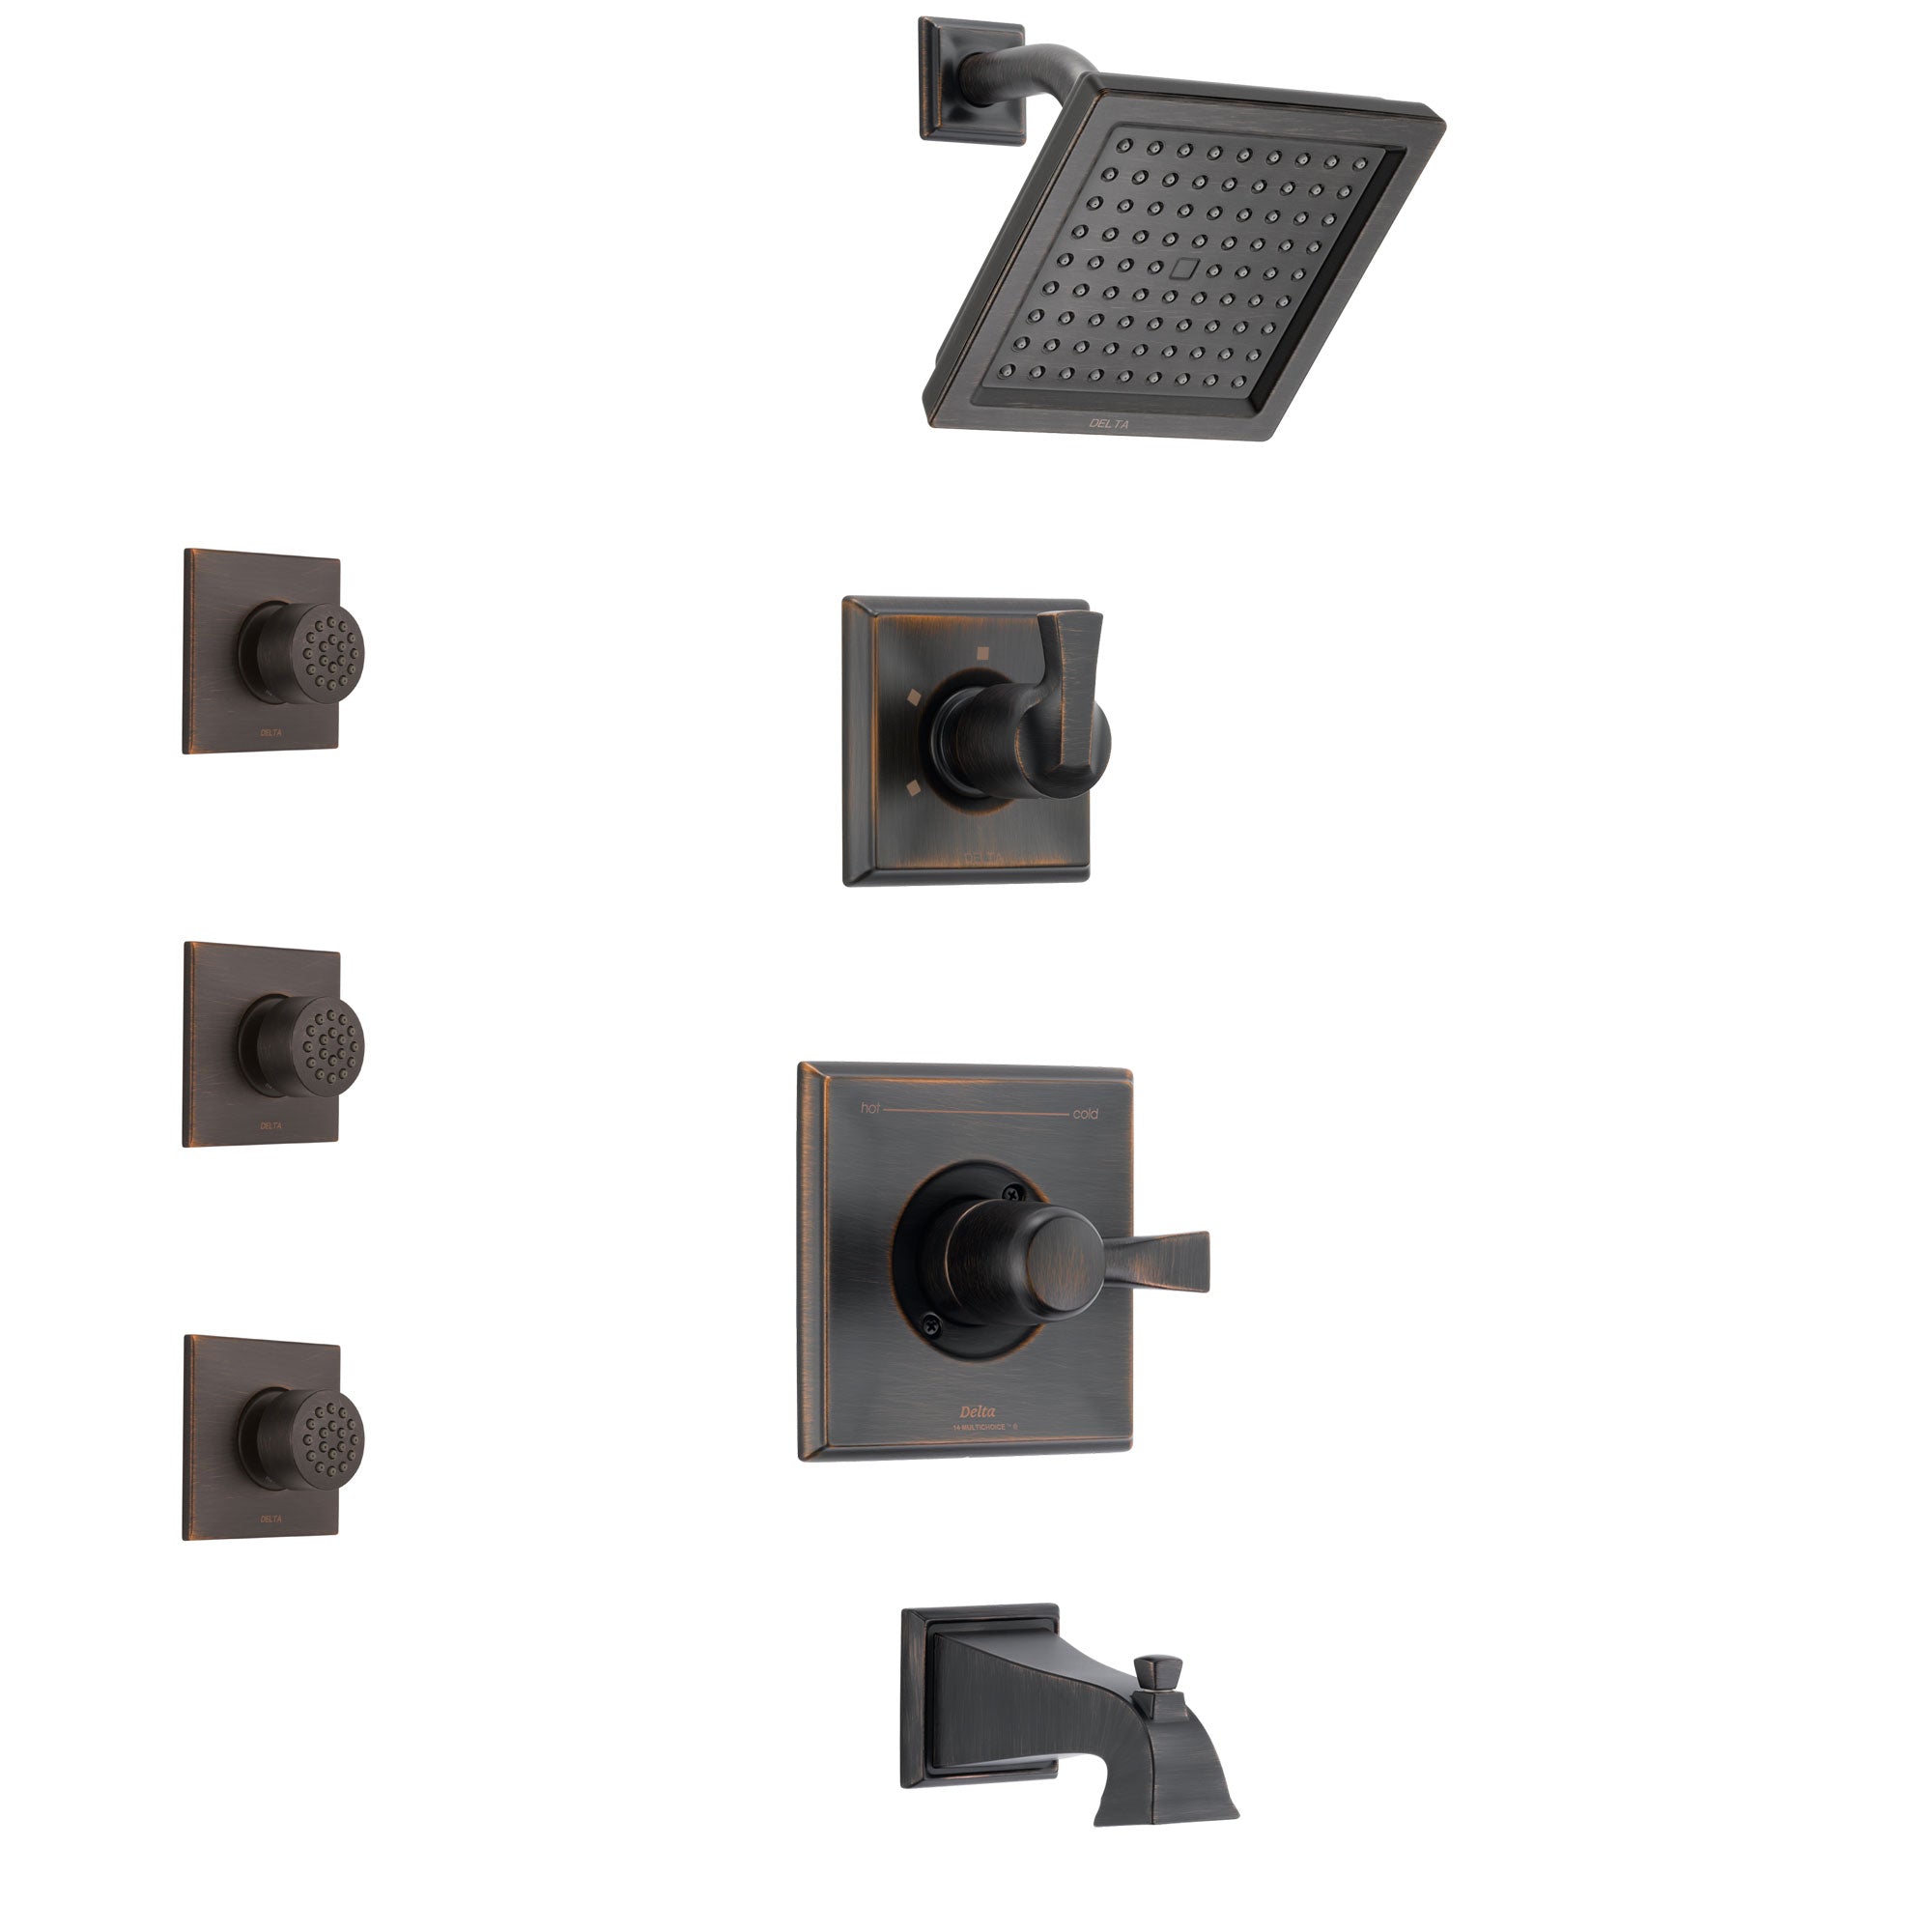 Delta Dryden Venetian Bronze Finish Tub and Shower System with Control Handle, 3-Setting Diverter, Showerhead, and 3 Body Sprays SS144511RB2